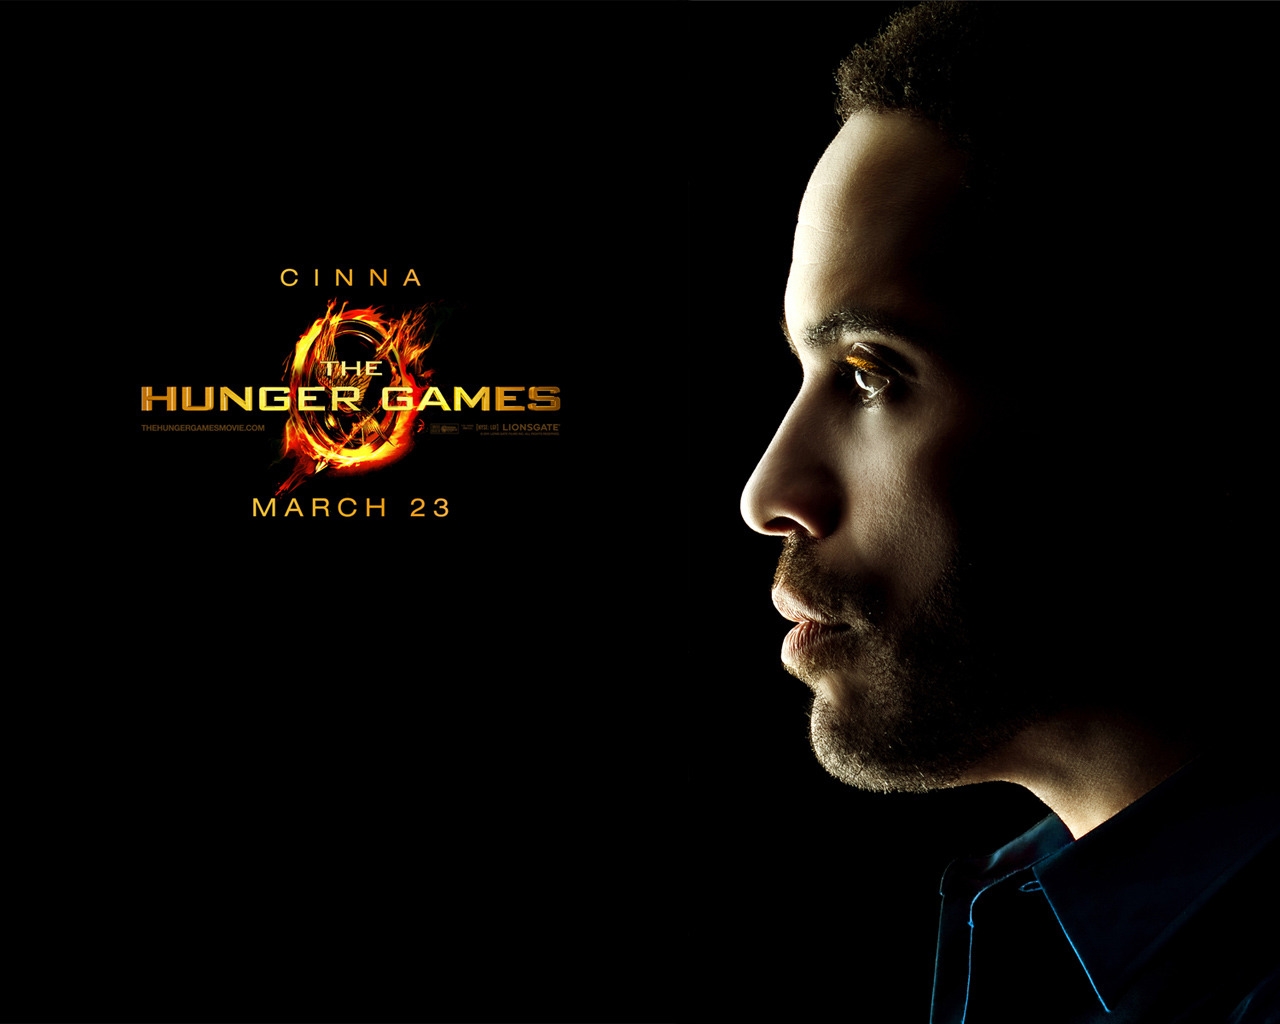 The Hunger Games Cinna for 1280 x 1024 resolution